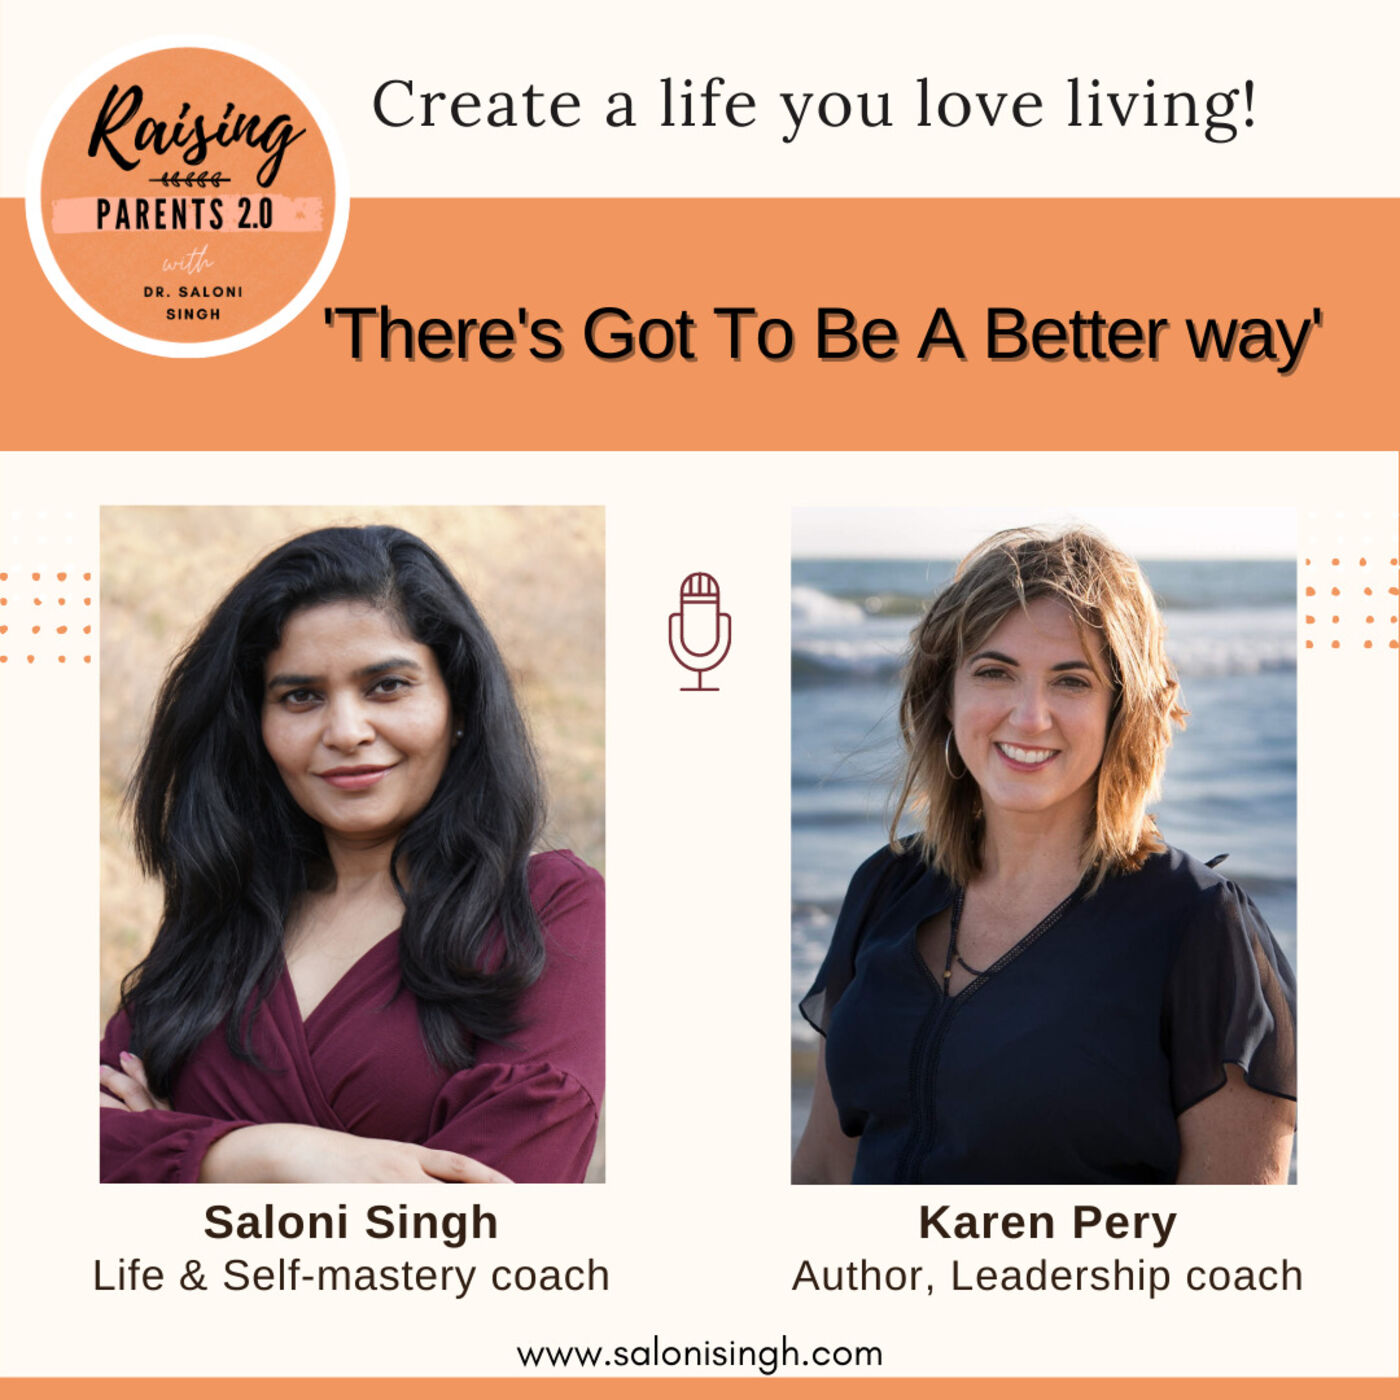 'There's got to be a better way' Saloni Singh with Karen Pery